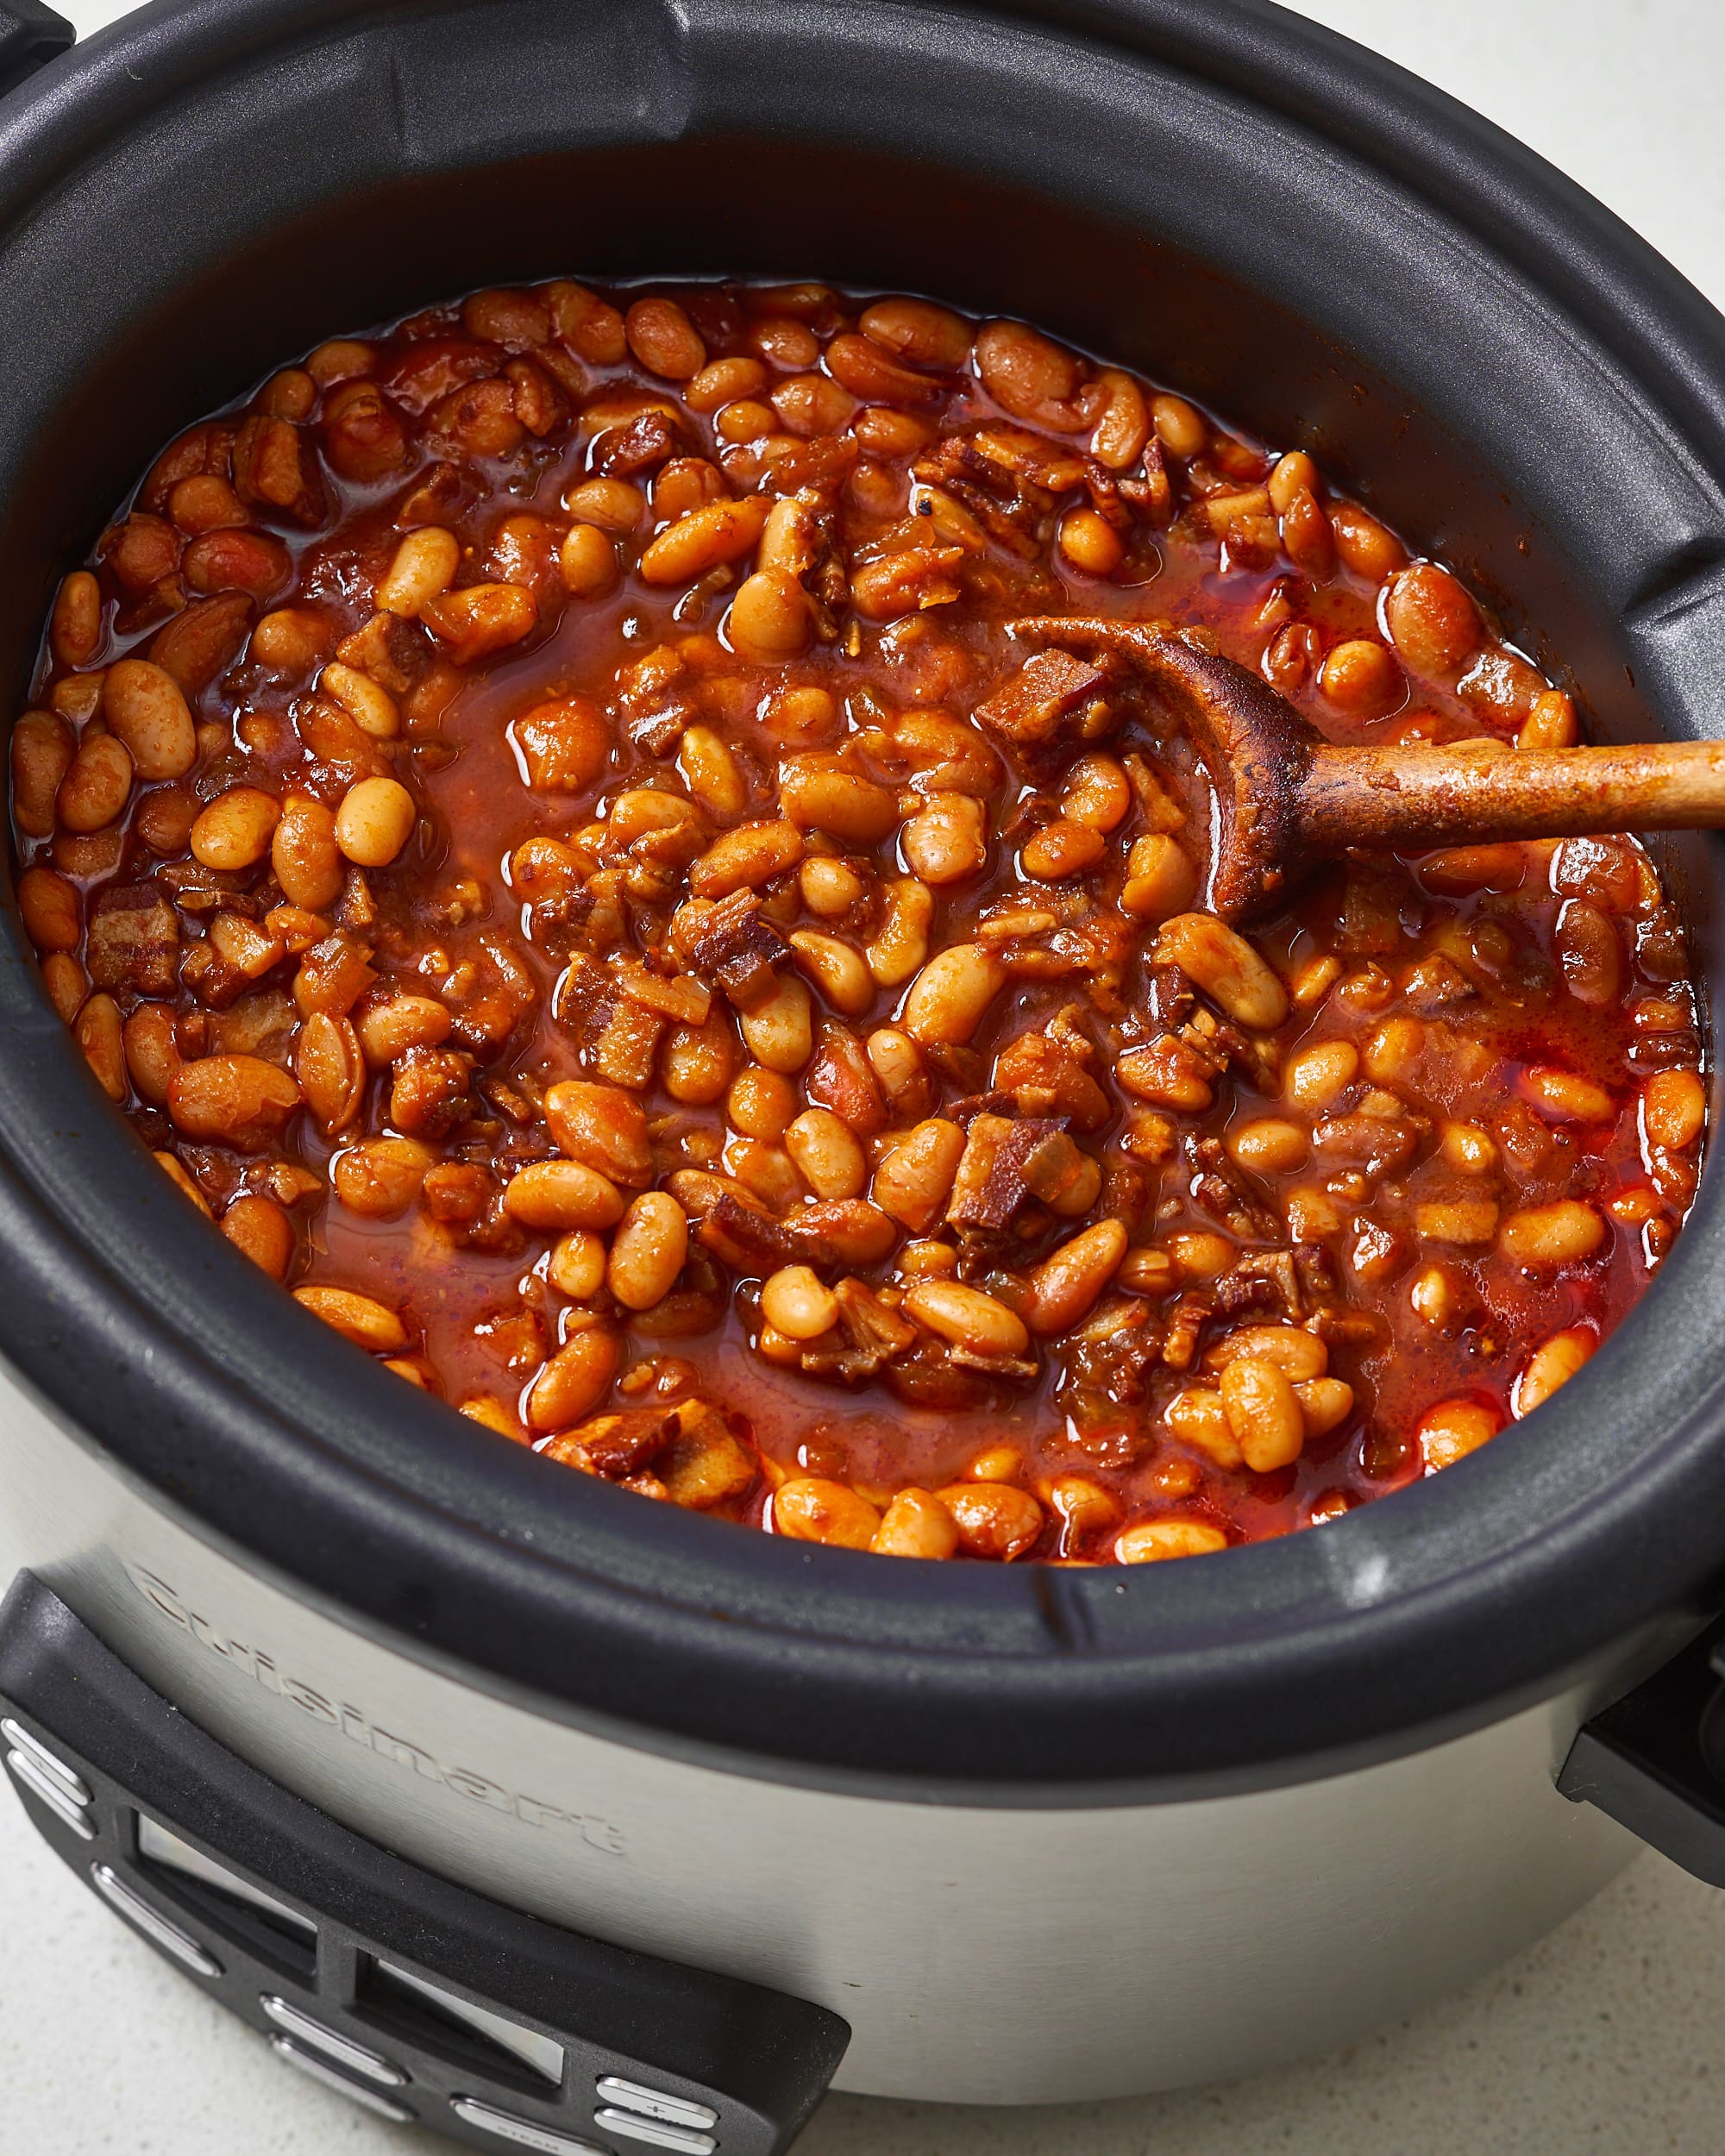 Slow Cooker Baked Beans Recipe (Tangy and Creamy)